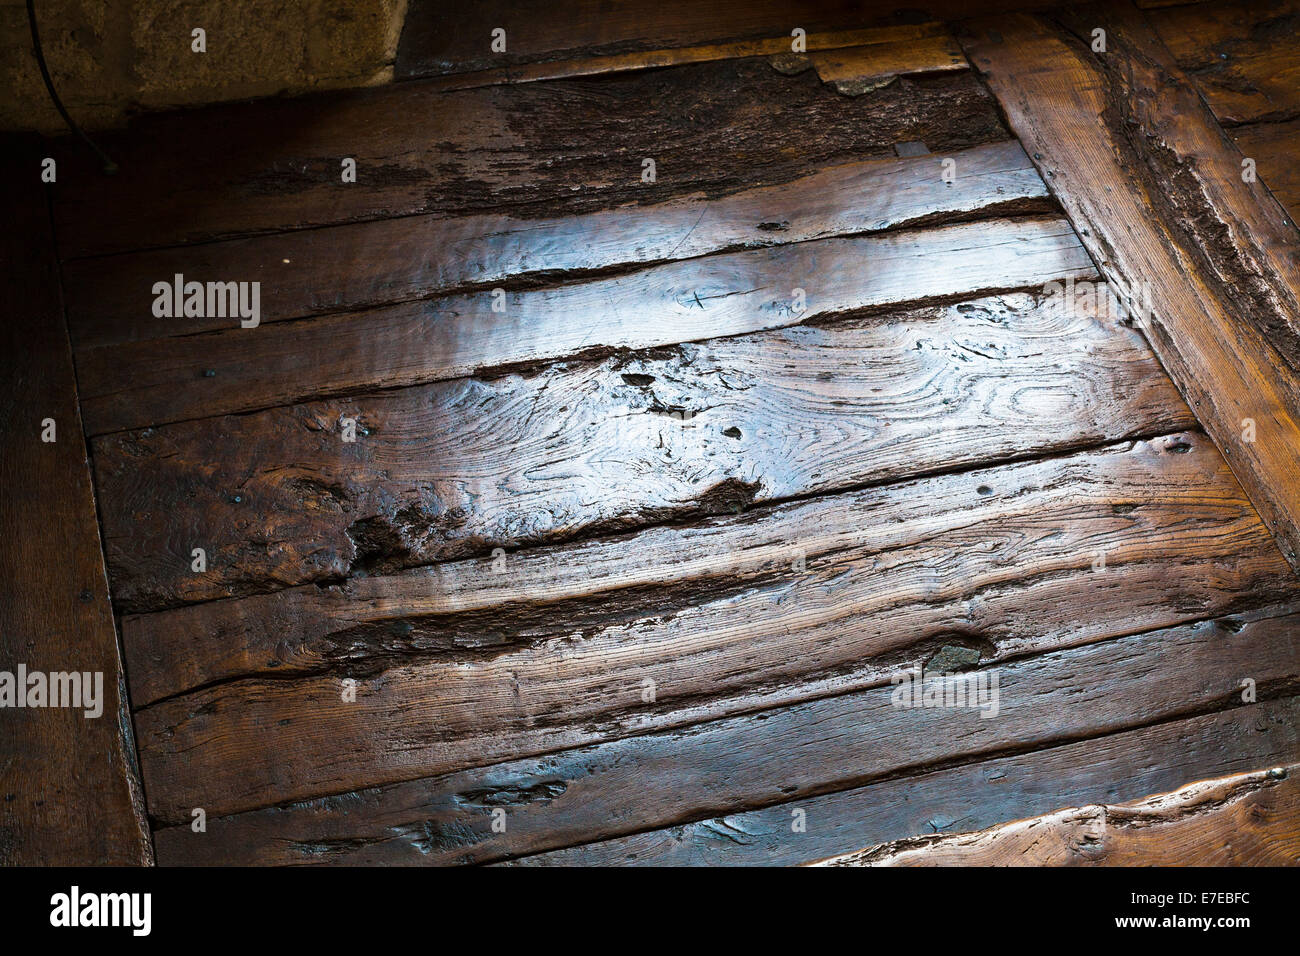 18c wood flooring in the Chateau de Monbazillac France. Stock Photo